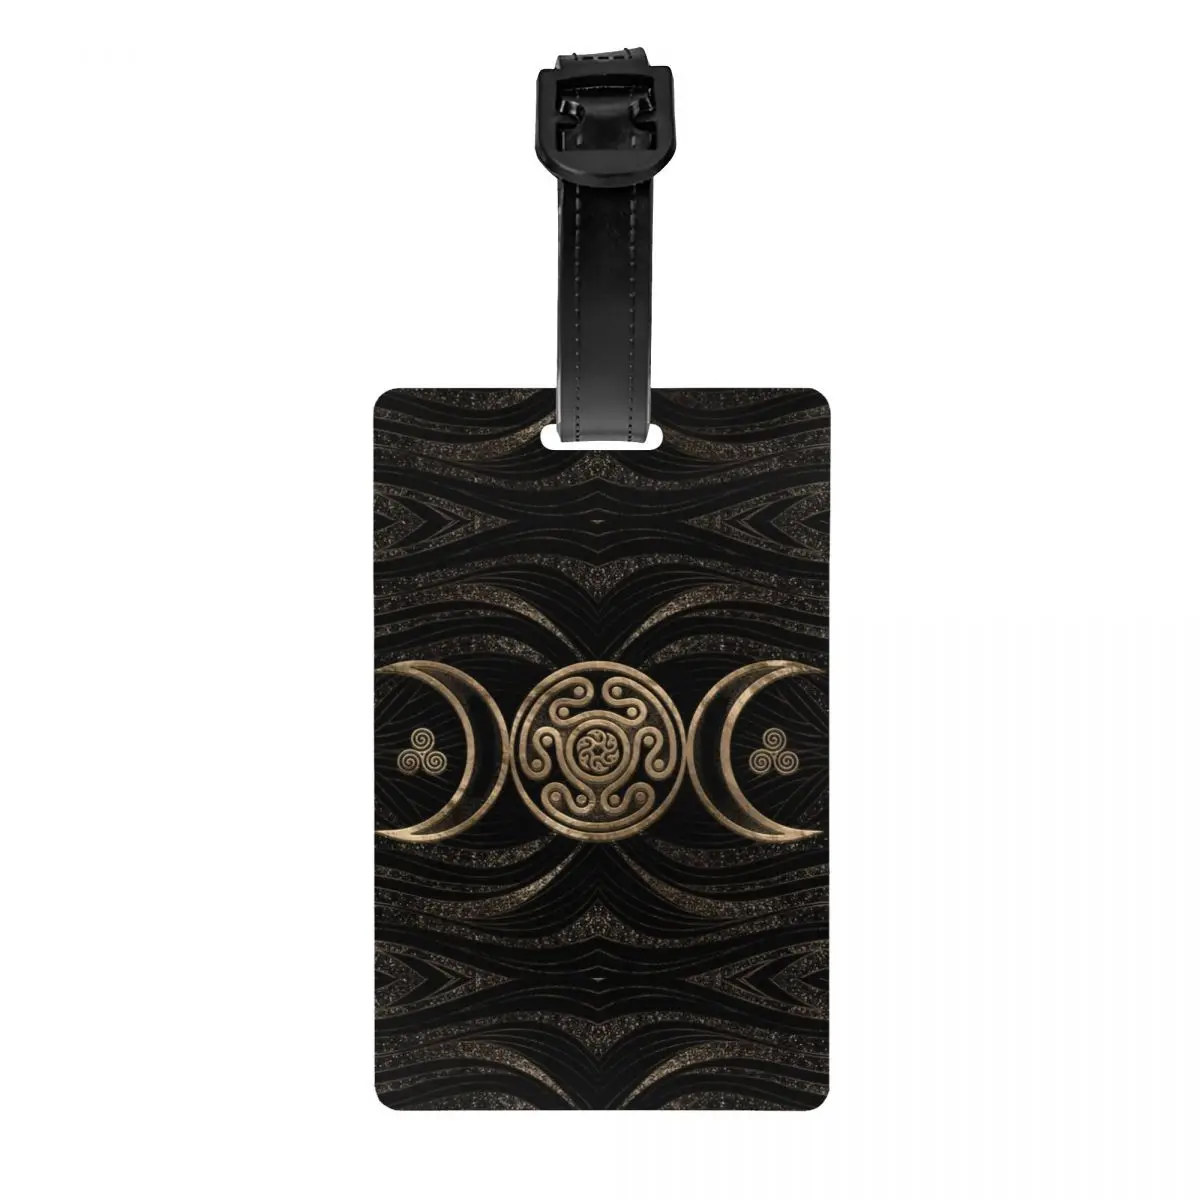 

Hecate Wheel Triple Moon Goddess Luggage Tag Goth Pentagram Witch Witchcraft Travel Bag Suitcase Privacy Cover ID Label